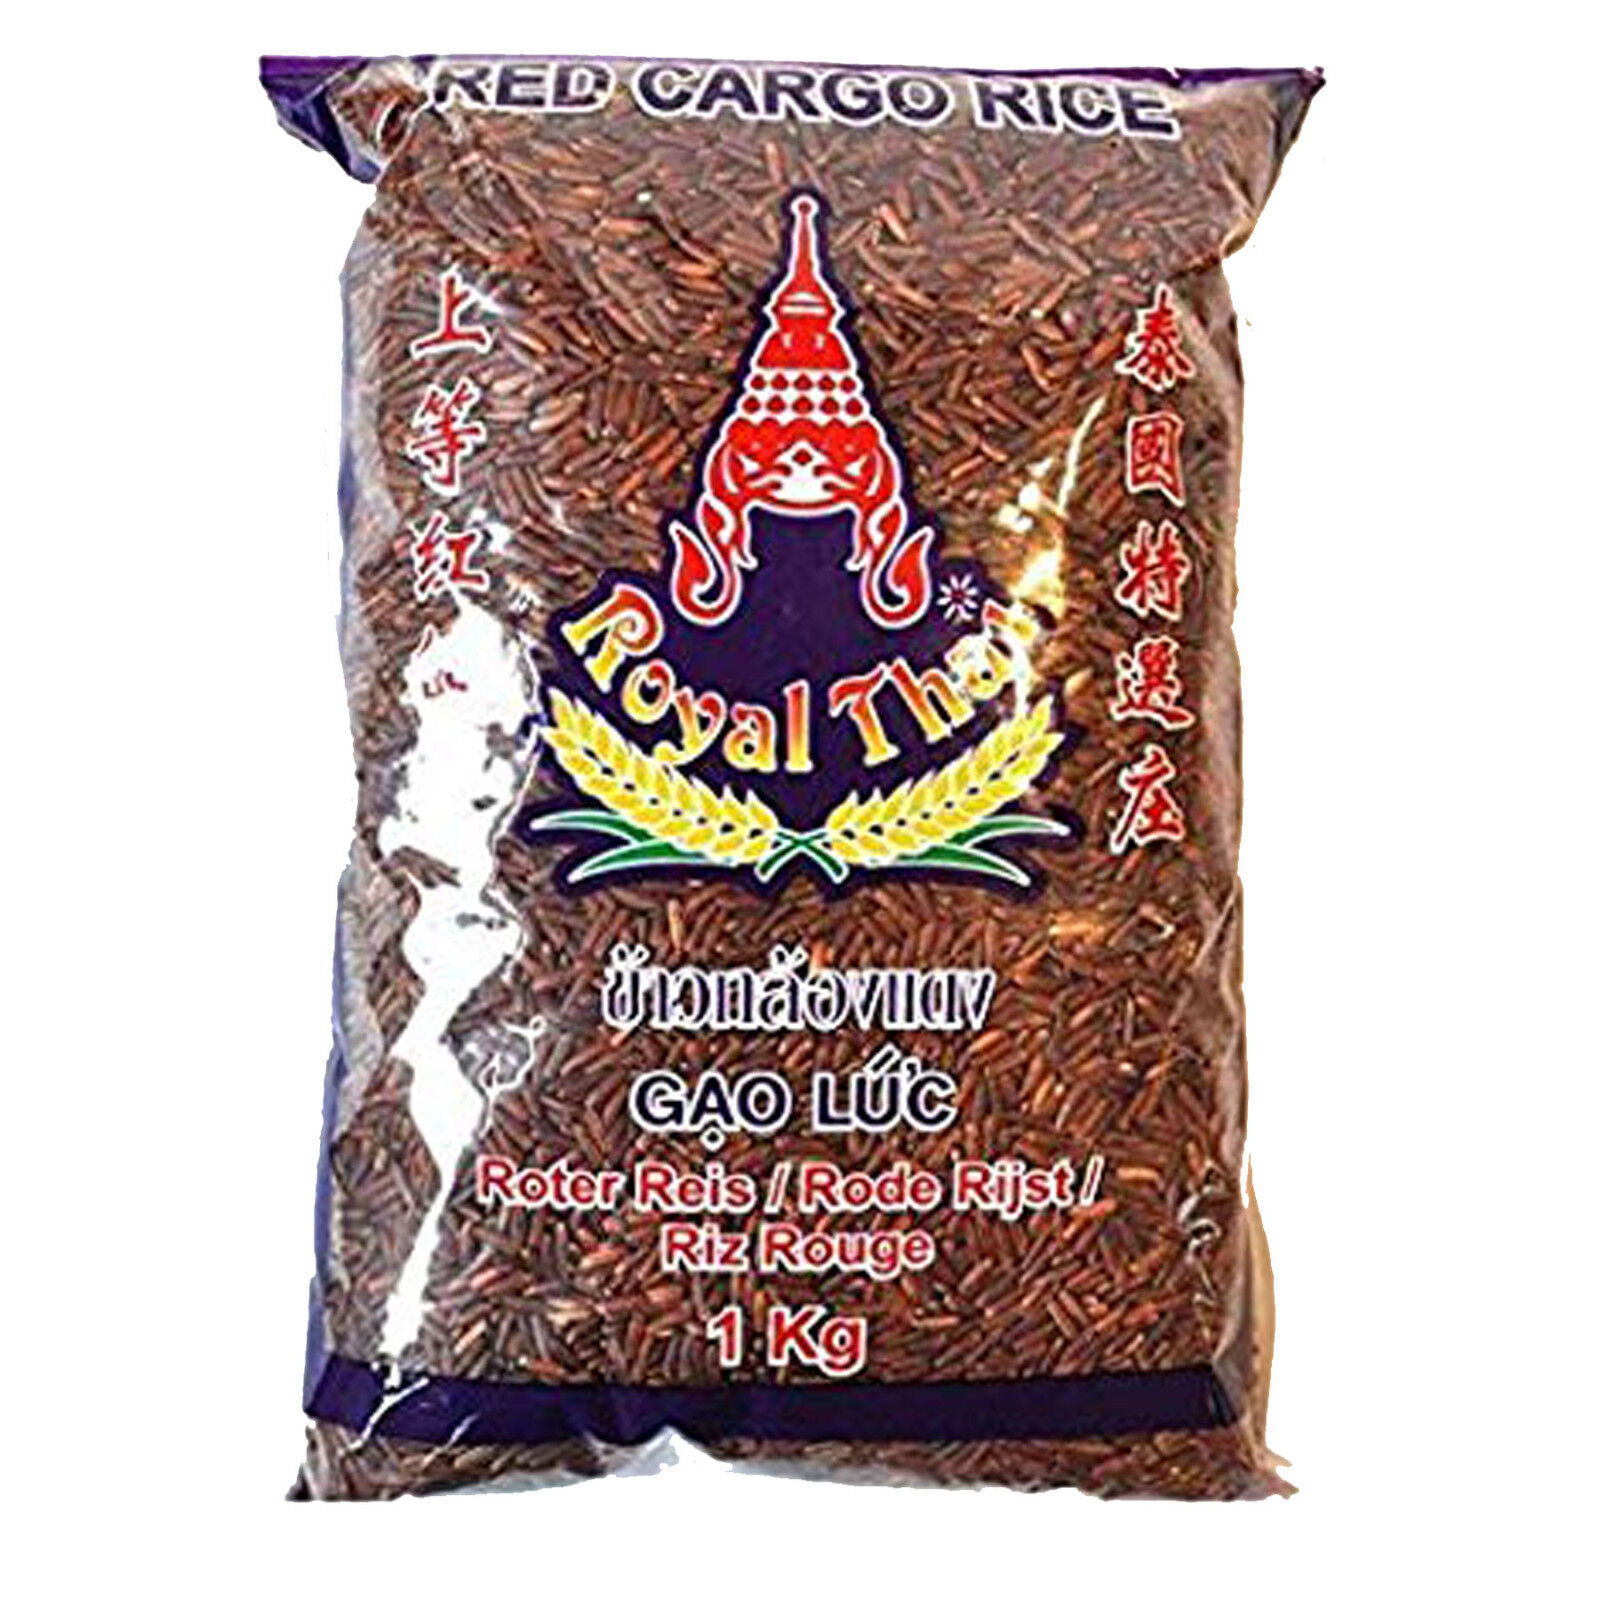 1 Kilo Red Natural Rice ROYAL THAI RED CARGO RICE Gao Luc Red Na